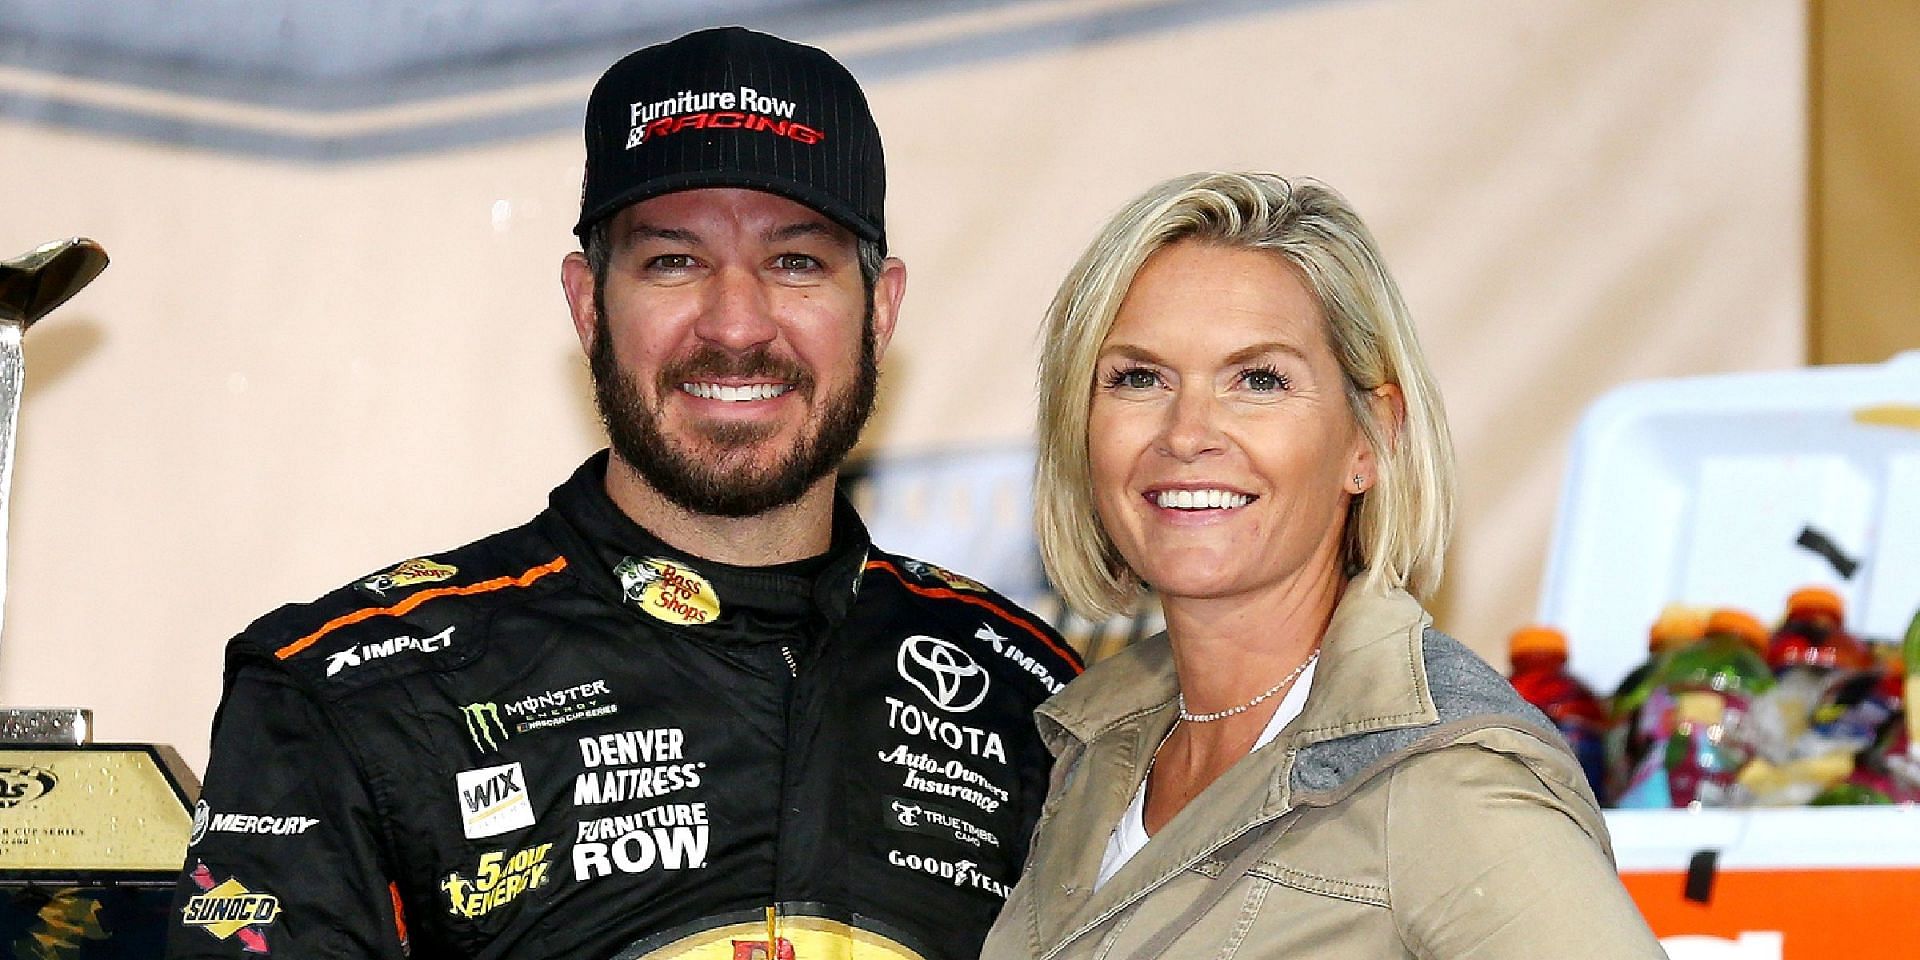 Crowd gives standing ovation to Martin Truex Jr.'s ex-girlfriend Sherry Pollex during his annual cancer charity event